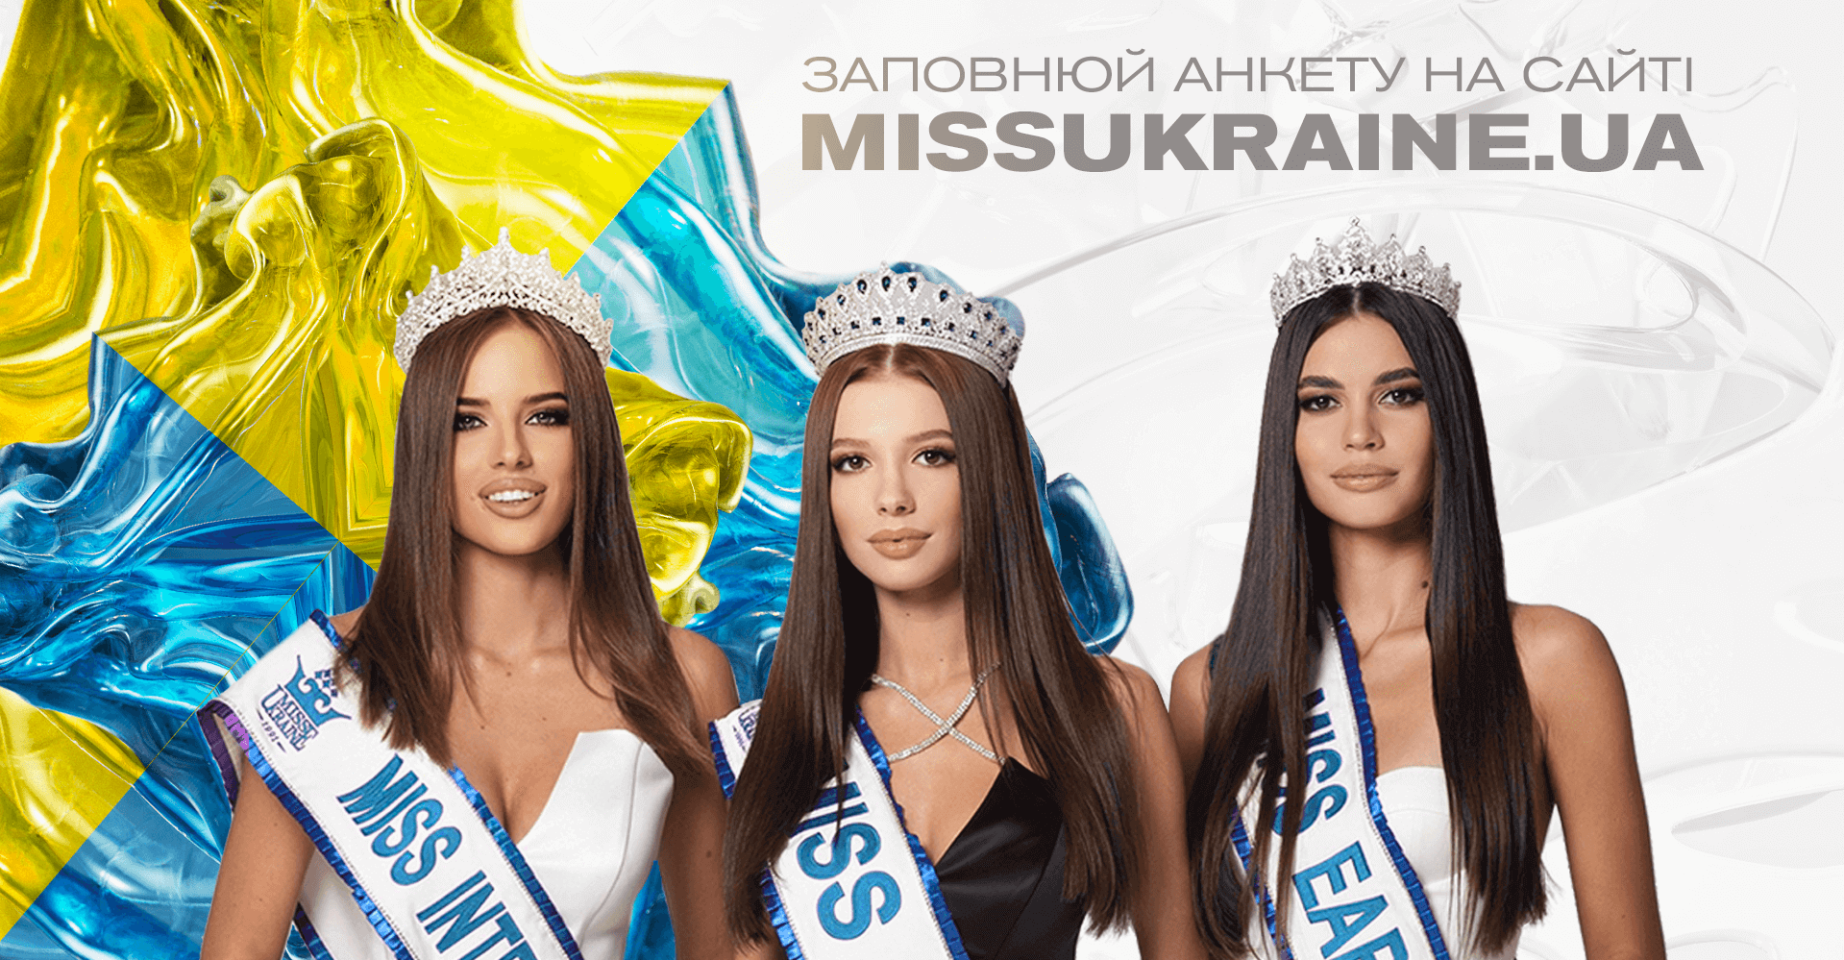 The mouthpiece of beauty: the organizers of the "Miss Ukraine" contest announced the start of the national selection